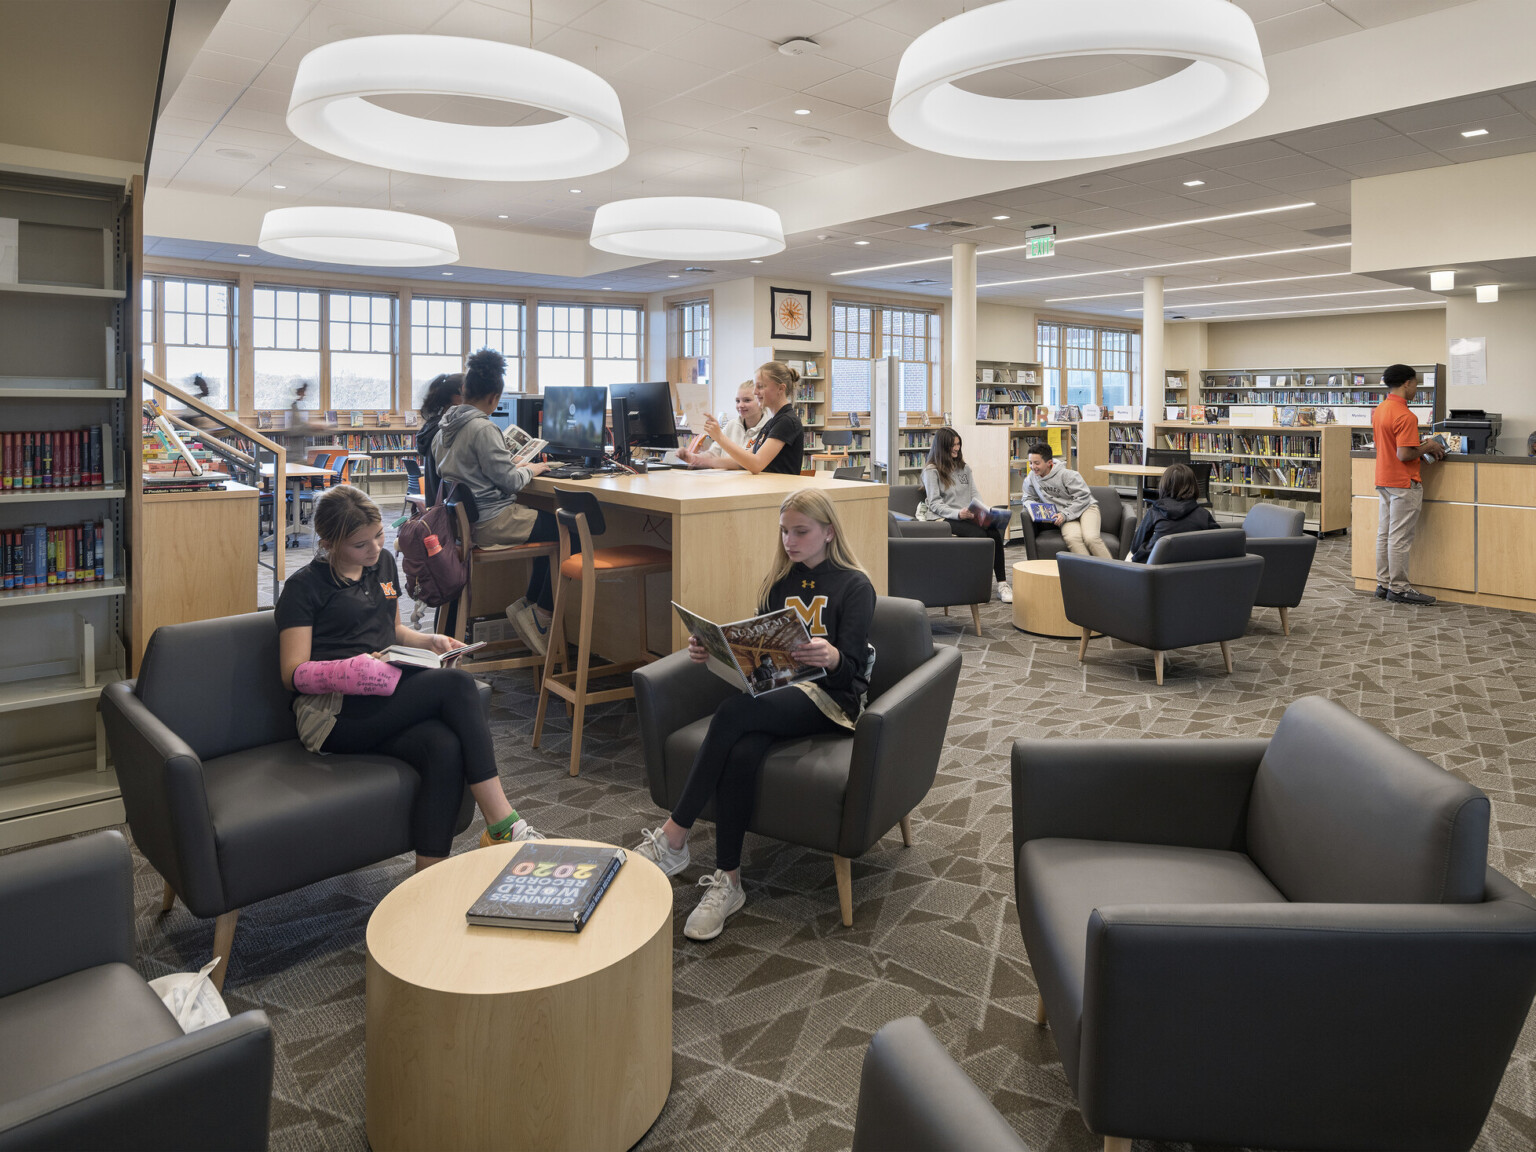 Middle school library with half height bookshelves, flexible tables and seating, arm chairs, light-colored woods, muted grey seating and modern circular lighting suspended from the ceiling